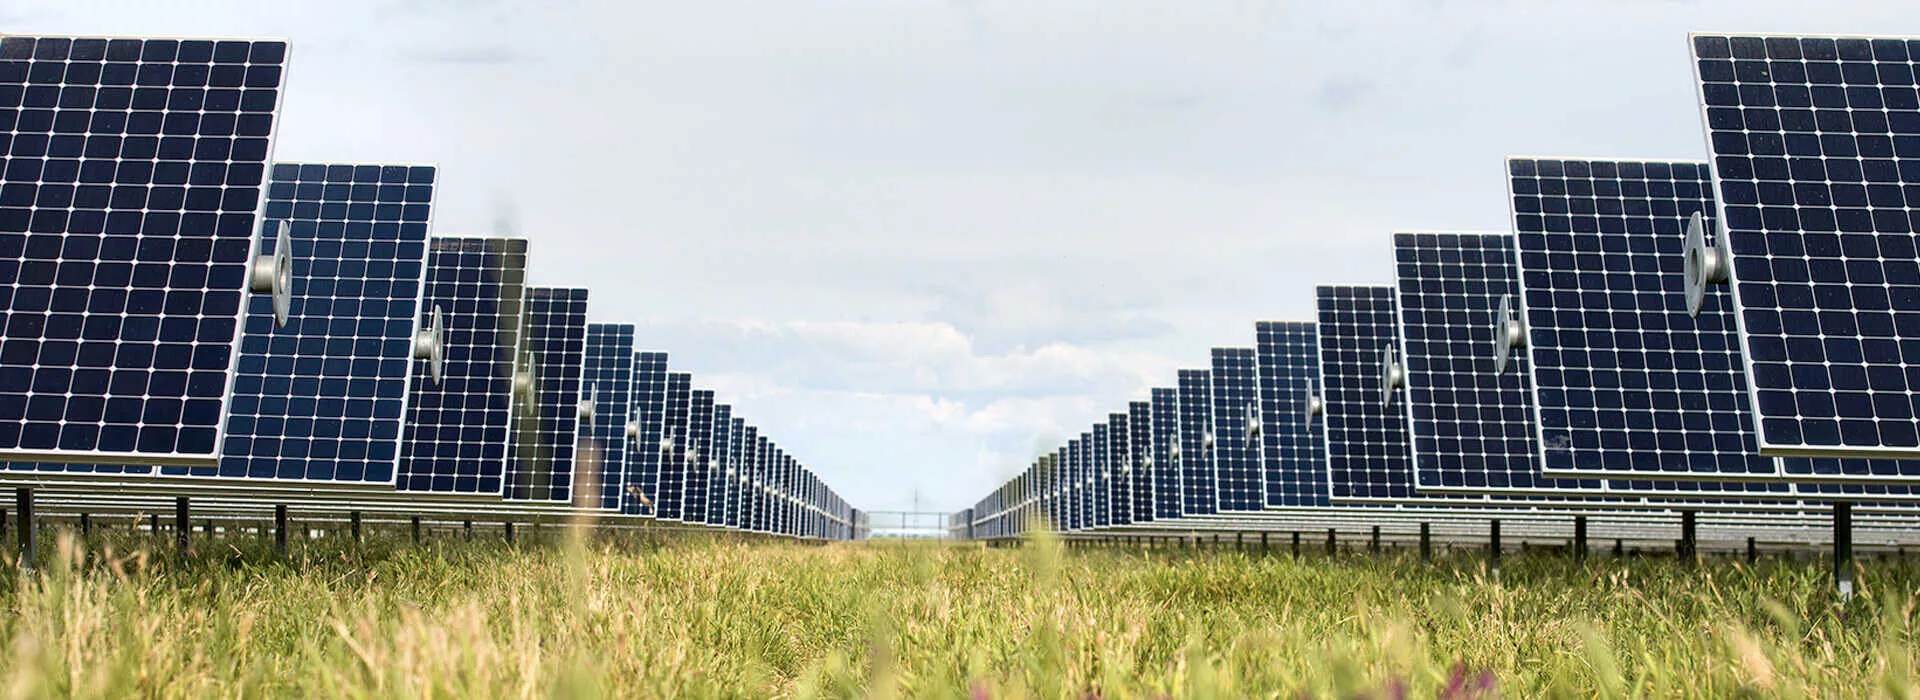 ground mount solar panels in a green field